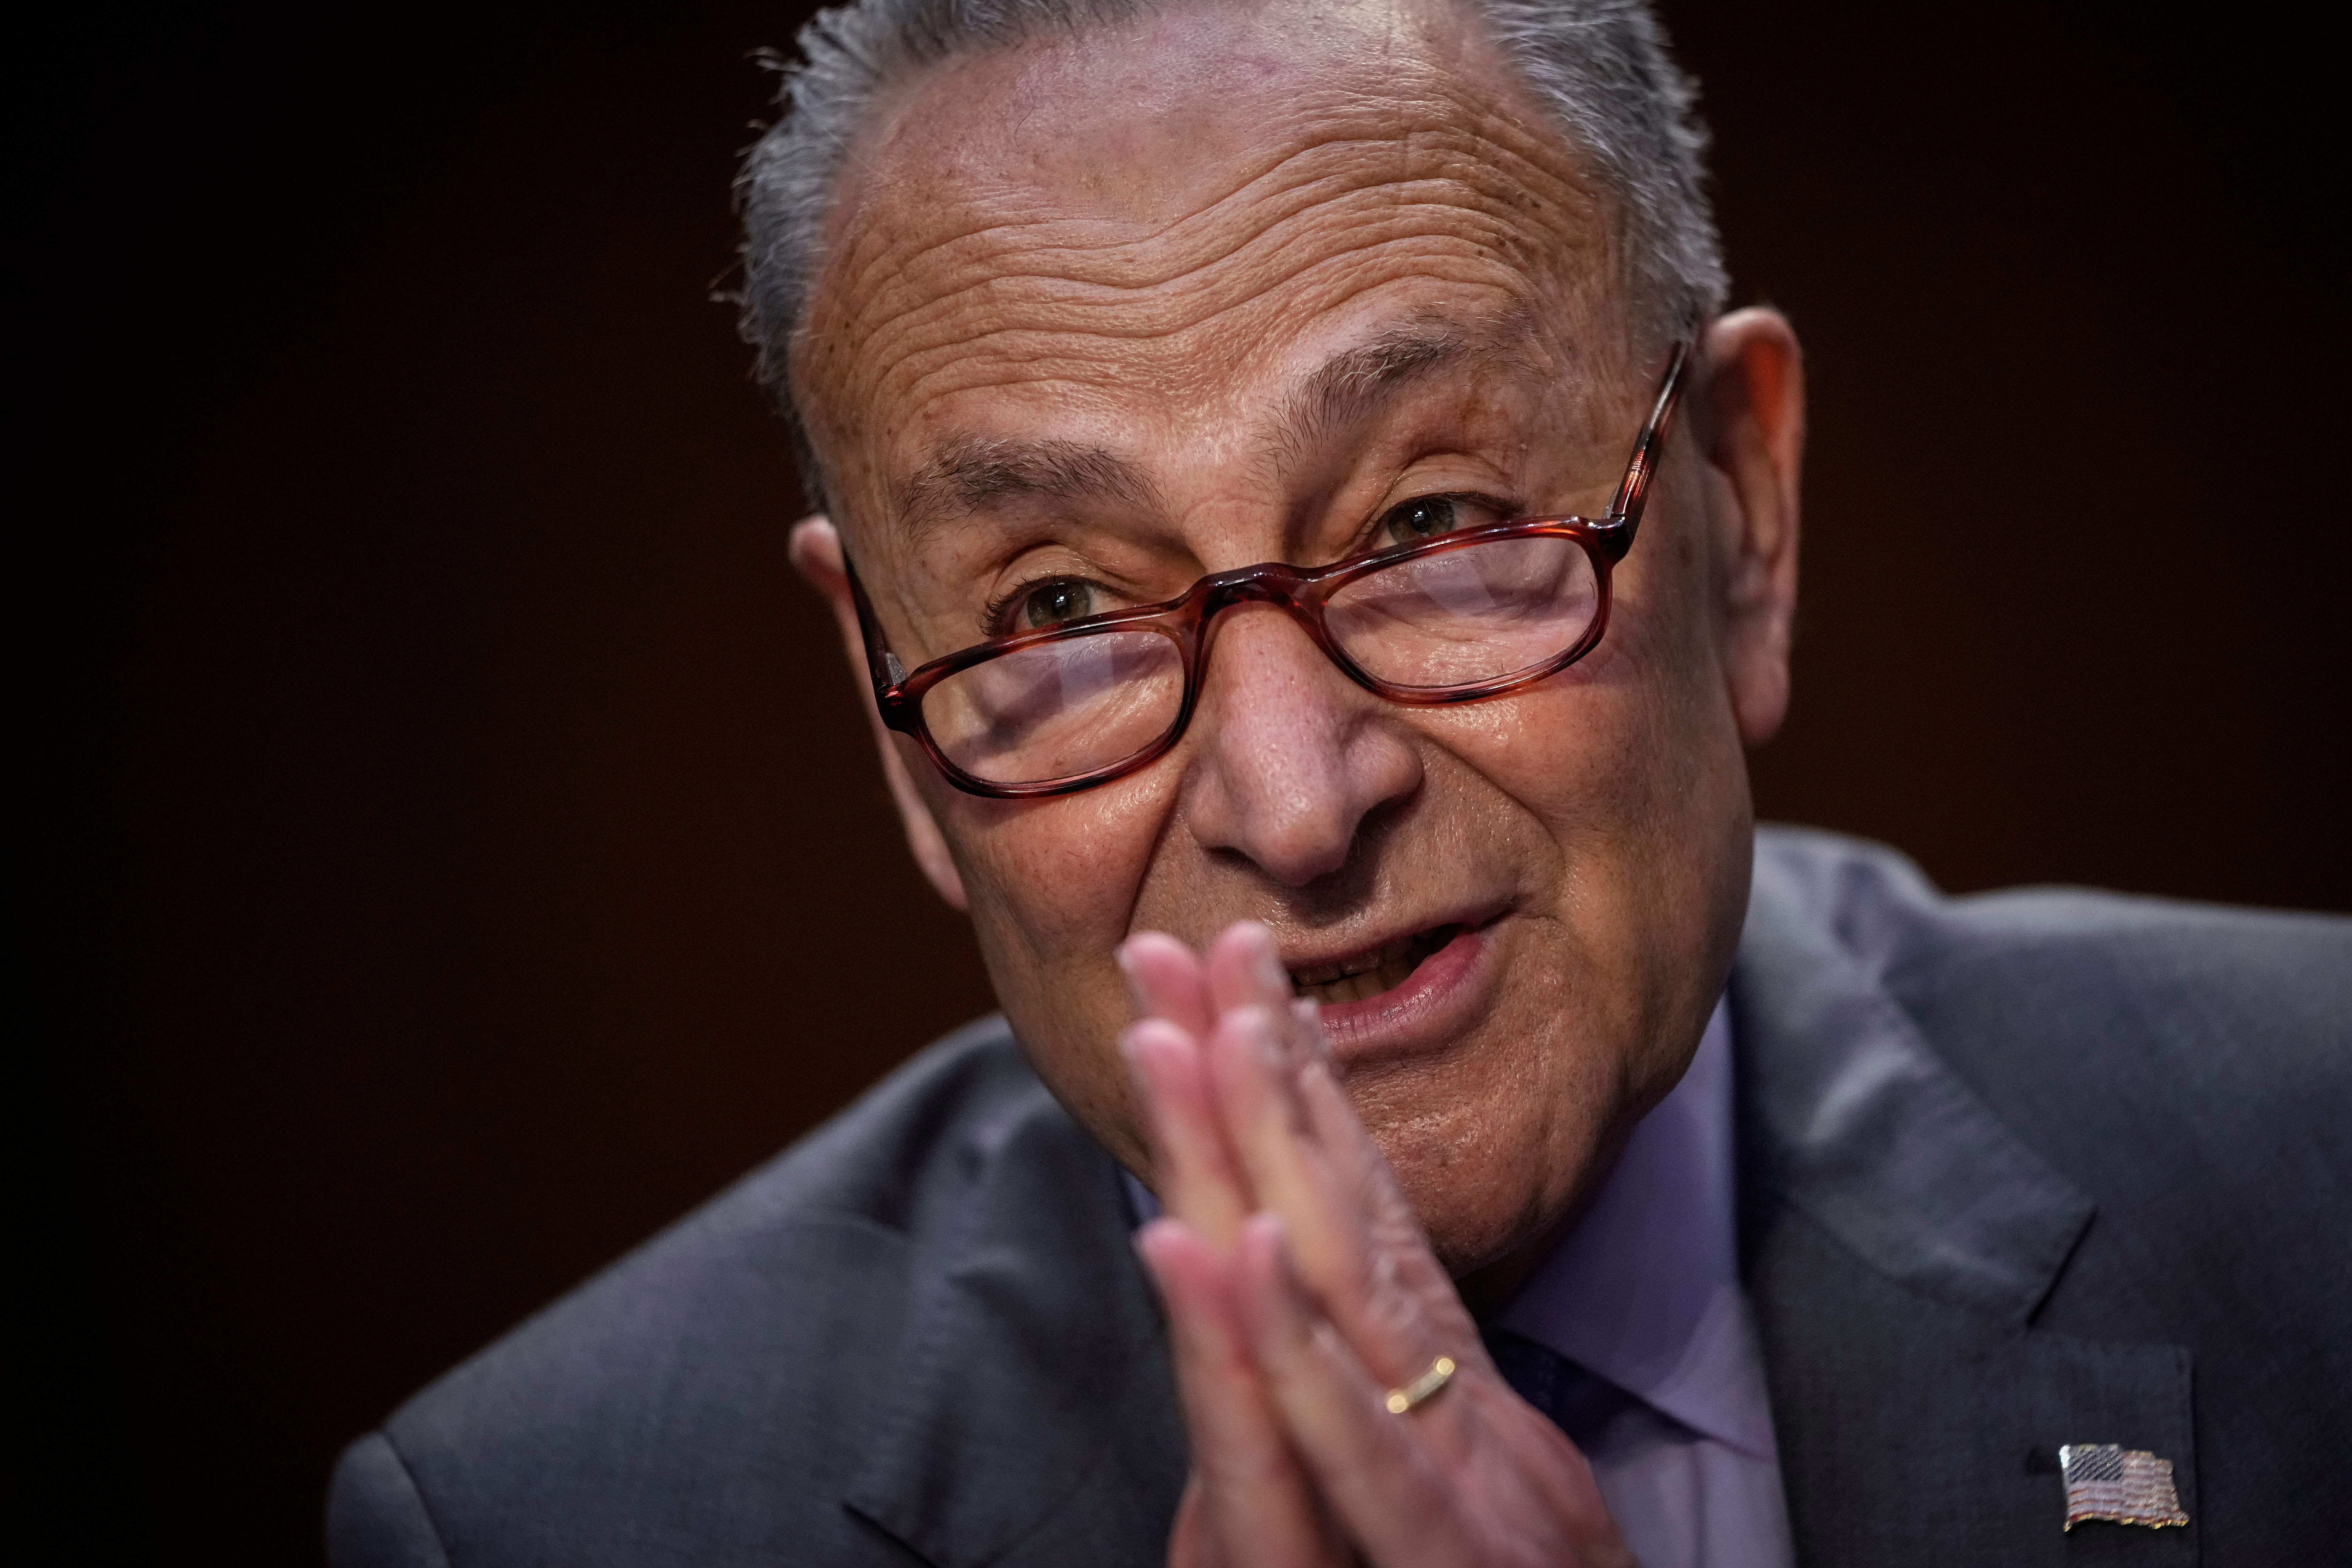 Senate Majority Leader Chuck Schumer (D-NY) speaks during a Senate Judiciary Committee hearing on judicial nominations on 9 June, 2021 in Washington, DC. Mr Schumer has apologised after using an outmoded term to describe children with disabilities.